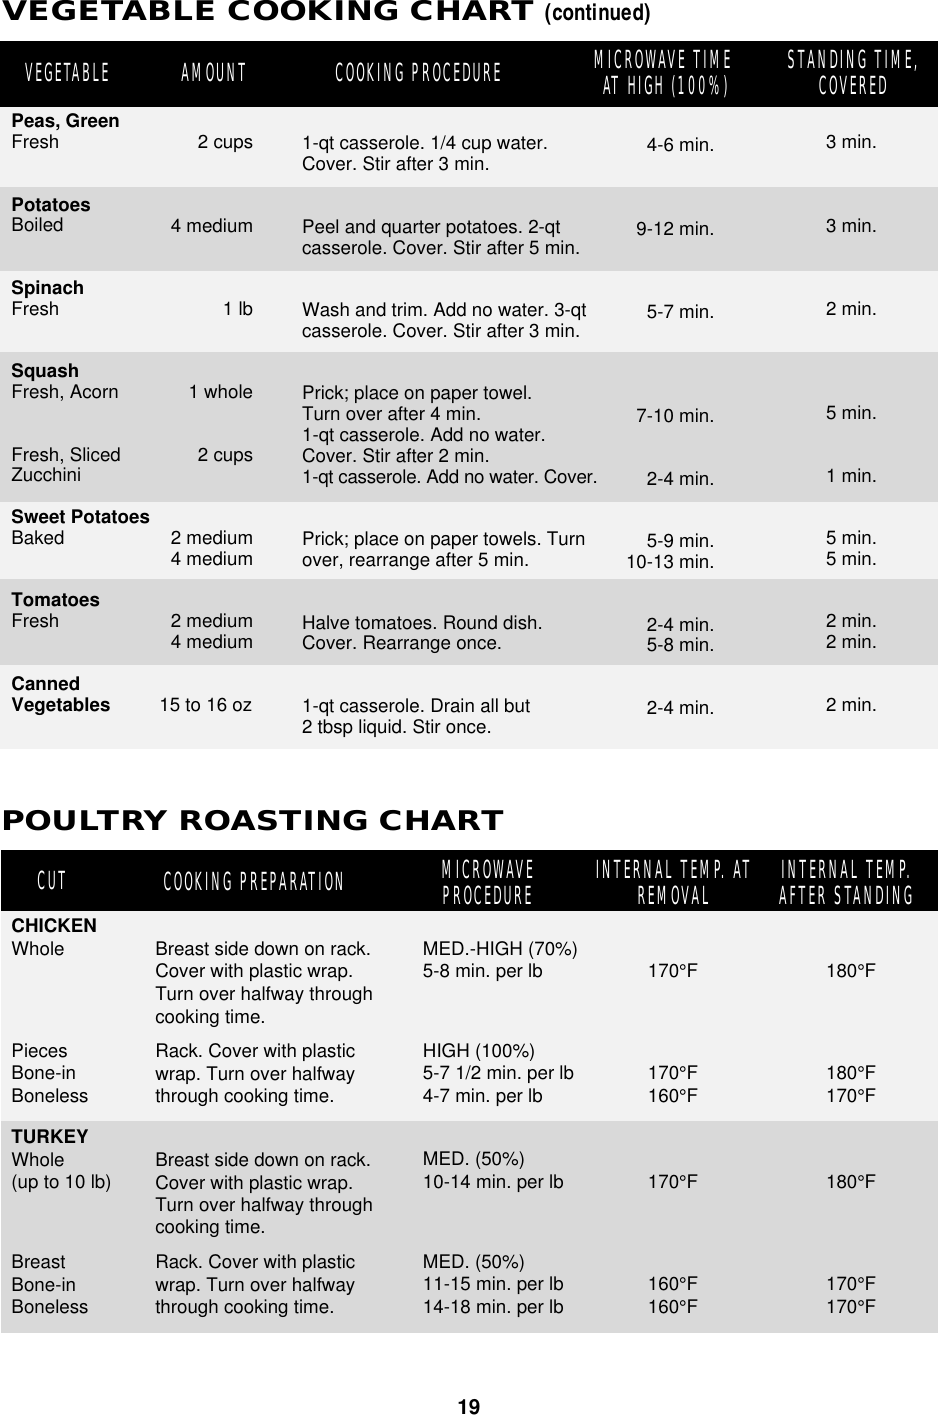 19VEGETABLE COOKING CHART (continued)INTERNAL TEMP. ATREMOVAL INTERNAL TEMP.AFTER STANDINGPOULTRY ROASTING CHARTCOOKING PREPARATIONCUT MICROWAVEPROCEDUREVEGETABLE AMOUNT COOKING PROCEDURE MICROWAVE TIME AT HIGH (100%) STANDING TIME,COVERED1-qt casserole. 1/4 cup water.Cover. Stir after 3 min.Peel and quarter potatoes. 2-qtcasserole. Cover. Stir after 5 min.Wash and trim. Add no water. 3-qtcasserole. Cover. Stir after 3 min.Prick; place on paper towel.Turn over after 4 min.1-qt casserole. Add no water.Cover. Stir after 2 min.1-qt casserole. Add no water. Cover.Prick; place on paper towels. Turnover, rearrange after 5 min.Halve tomatoes. Round dish.Cover. Rearrange once.1-qt casserole. Drain all but2 tbsp liquid. Stir once.4-6 min.9-12 min.5-7 min.7-10 min.2-4 min.5-9 min.10-13 min.2-4 min.5-8 min.2-4 min.3 min.3 min.2 min.5 min.1 min.5 min.5 min.2 min.2 min.2 min.2 cups4 medium1 lb1 whole2 cups2 medium4 medium2 medium4 medium15 to 16 ozPeas, GreenFreshPotatoesBoiledSpinachFreshSquashFresh, AcornFresh, SlicedZucchiniSweet PotatoesBakedTomatoesFreshCannedVegetablesCHICKENWholePiecesBone-inBonelessTURKEYWhole(up to 10 lb)BreastBone-inBonelessBreast side down on rack.Cover with plastic wrap.Turn over halfway throughcooking time.Rack. Cover with plasticwrap. Turn over halfwaythrough cooking time.Breast side down on rack.Cover with plastic wrap.Turn over halfway throughcooking time.Rack. Cover with plasticwrap. Turn over halfwaythrough cooking time.MED.-HIGH (70%)5-8 min. per lbHIGH (100%)5-7 1/2 min. per lb4-7 min. per lbMED. (50%)10-14 min. per lbMED. (50%)11-15 min. per lb14-18 min. per lb170°F170°F160°F170°F160°F160°F180°F180°F170°F180°F170°F170°F